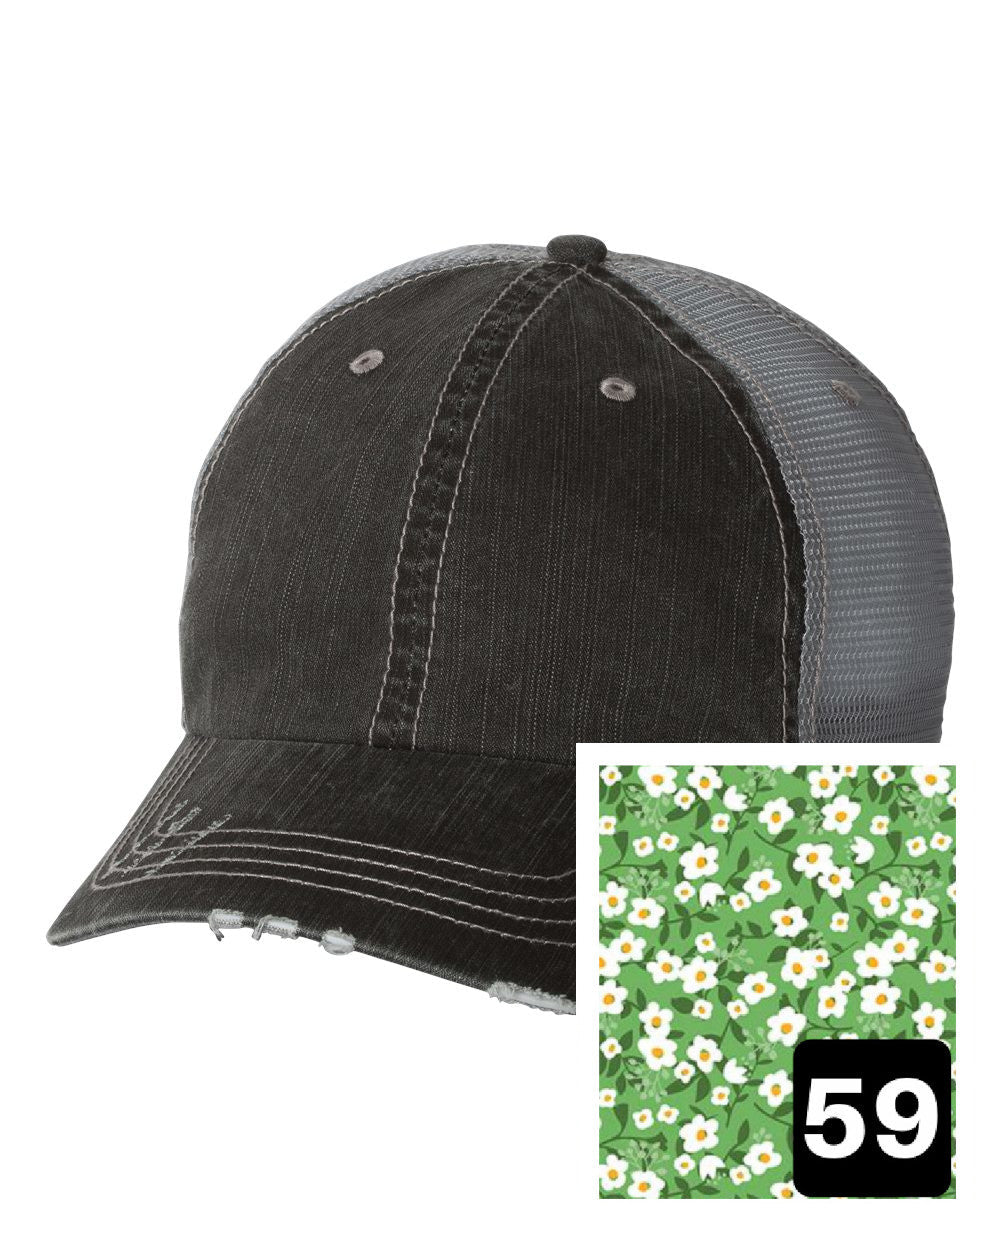 gray distressed trucker hat with white floral on red fabric state of Georgia